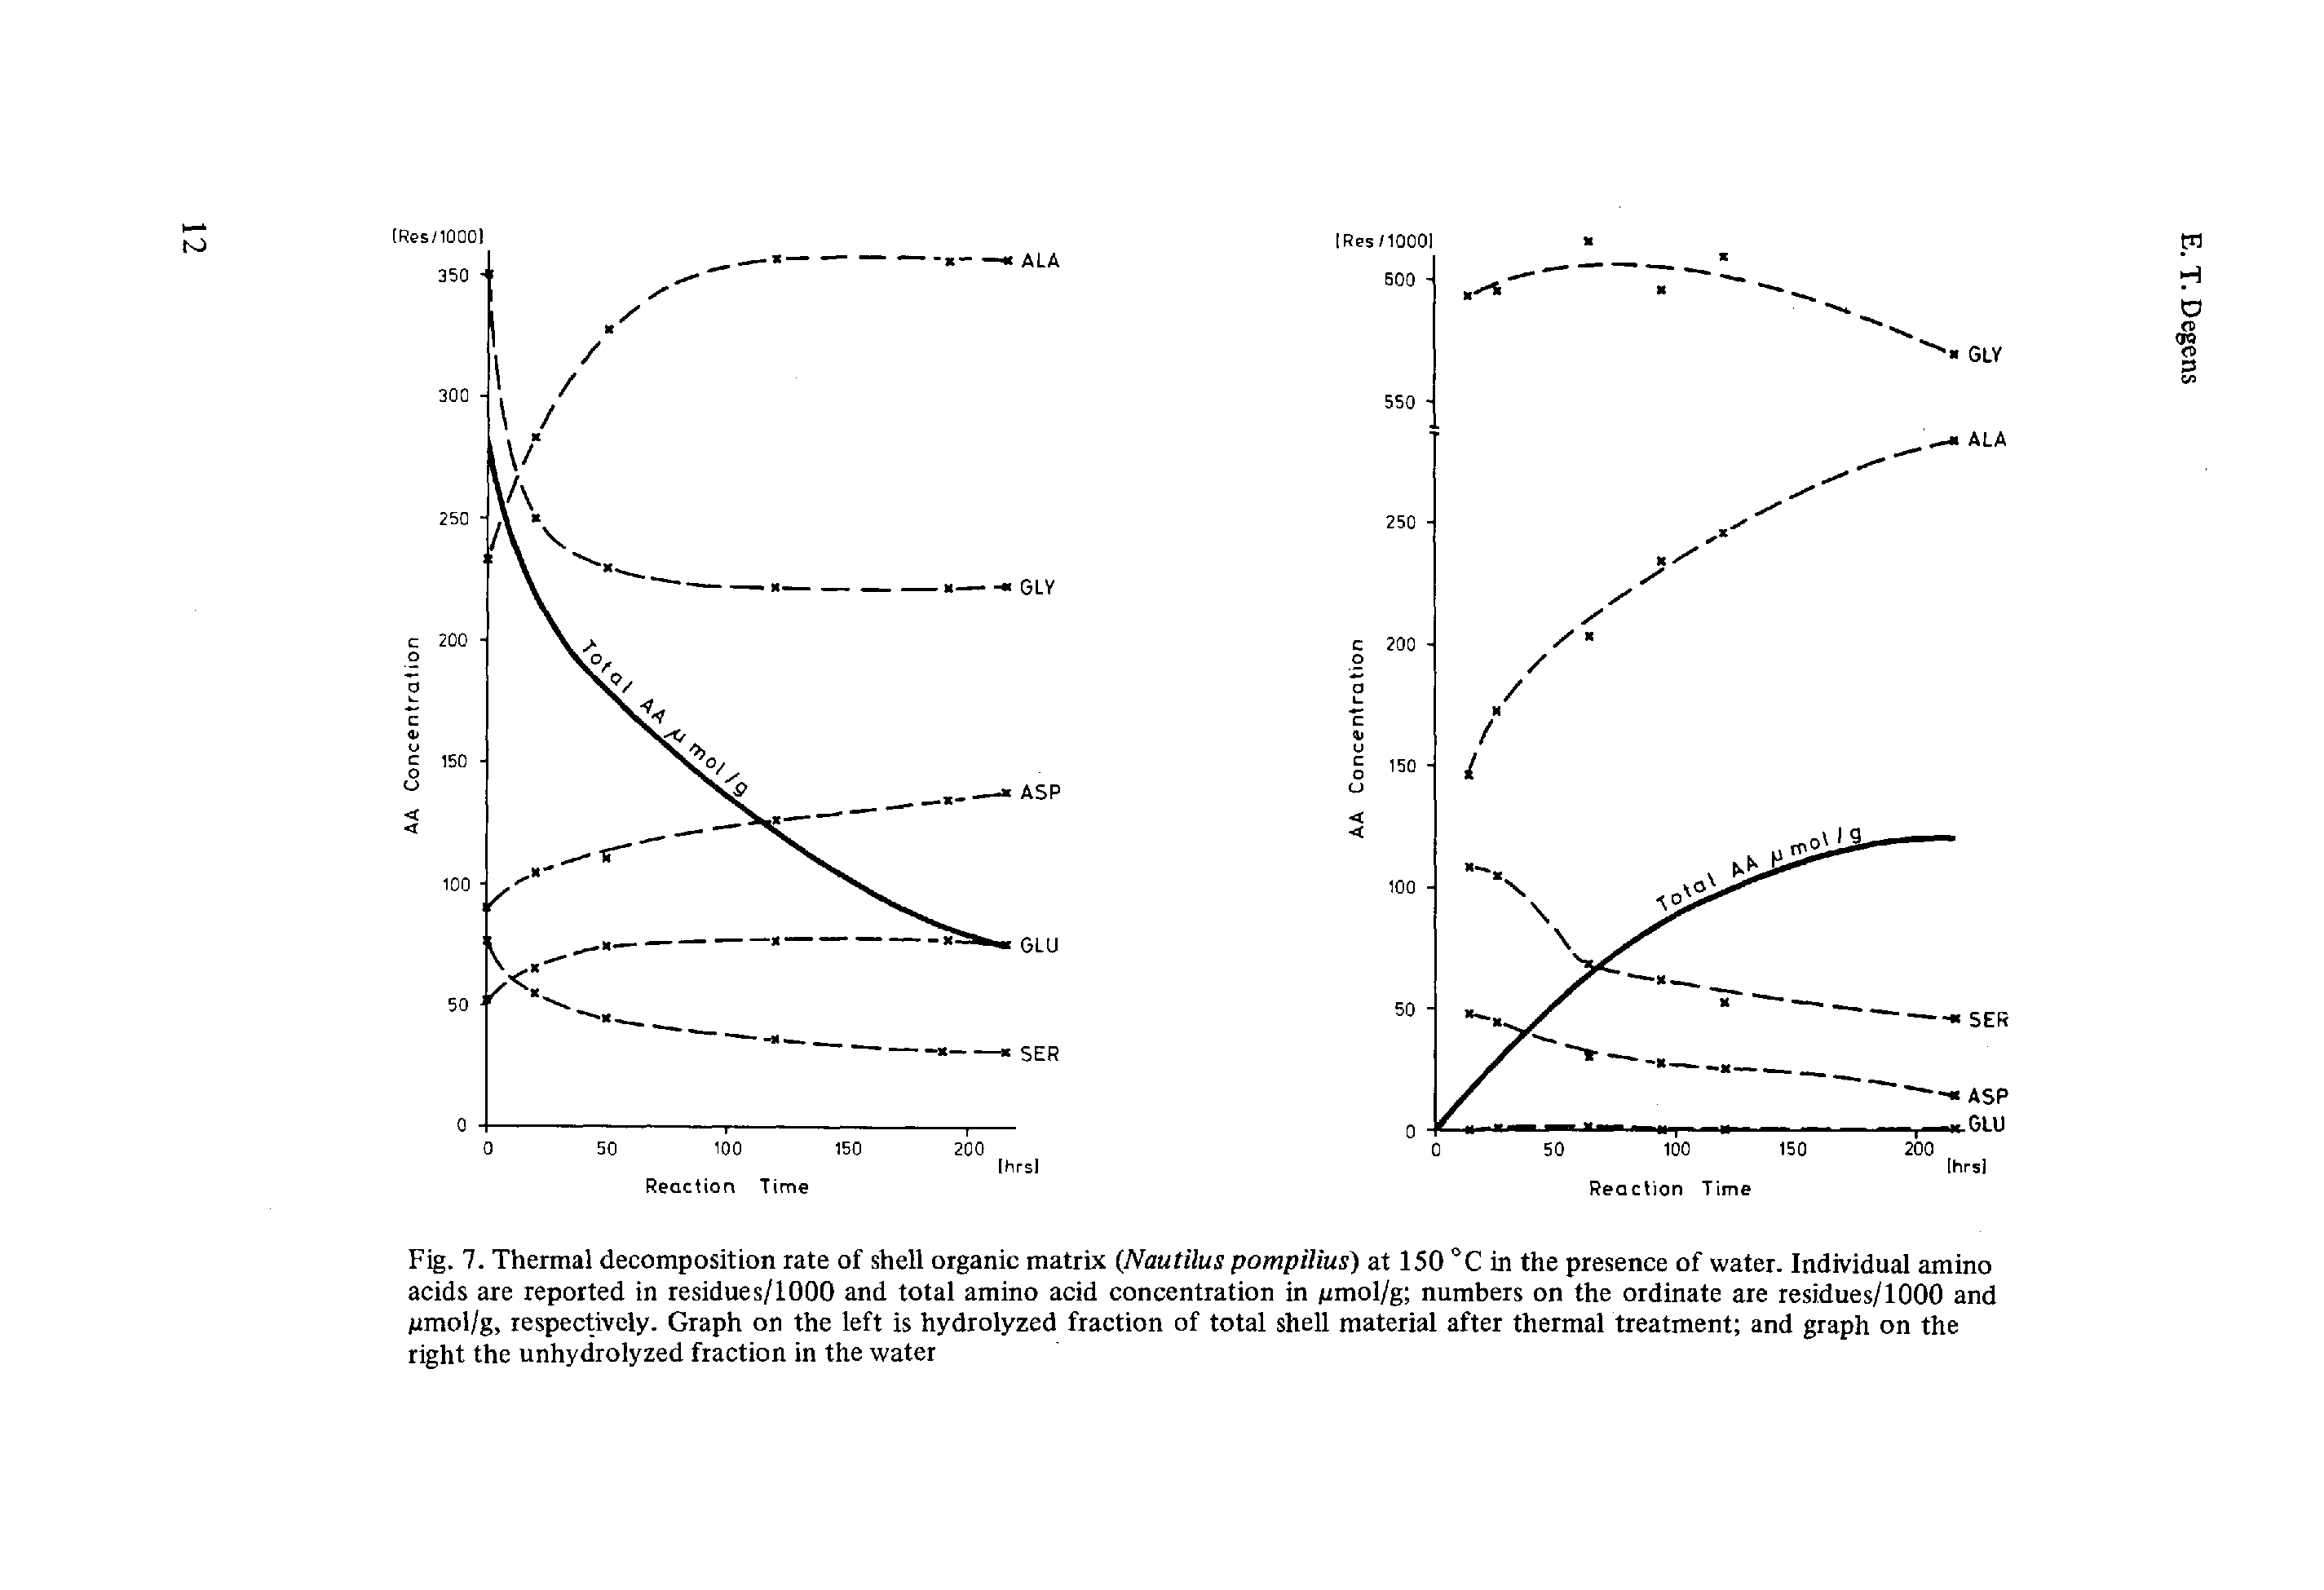 Fig. 7. Thermal decomposition rate of shell organic matrix (Nautilus pompilius) at 150 °C in the presence of water. Individual amino acids are reported in residues/1000 and total amino acid concentration in pmol/g numbers on the ordinate are residues/1000 and pmol/g, respectively. Graph on the left is hydrolyzed fraction of total shell material after thermal treatment and graph on the right the unhydrolyzed fraction in the water...